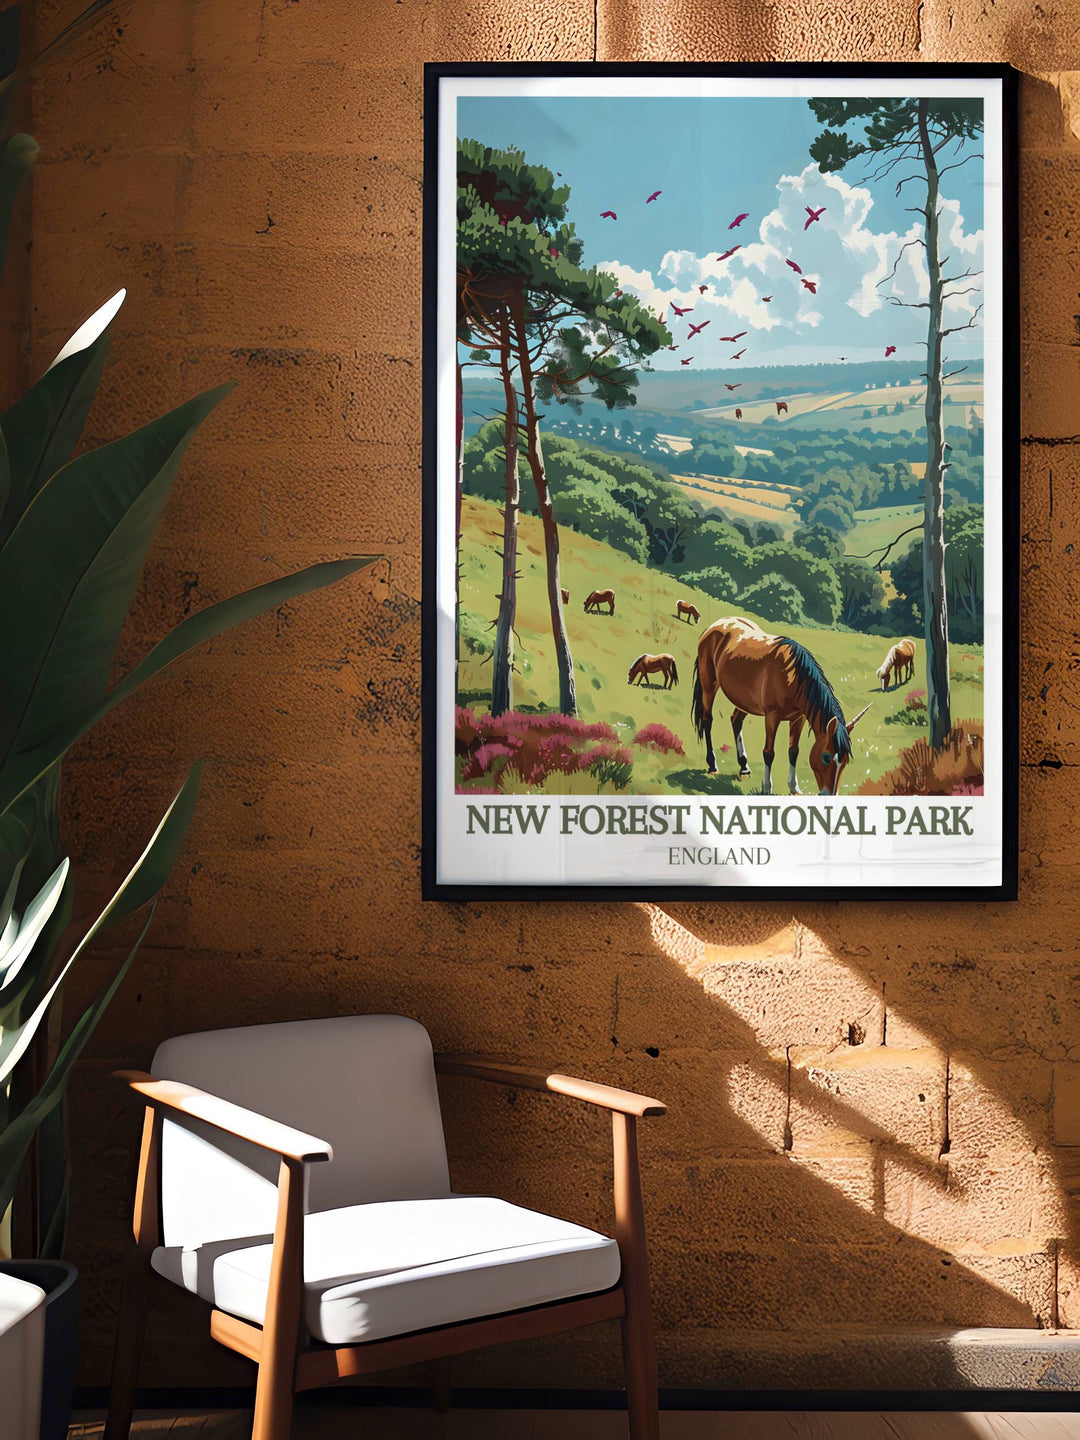 Framed art featuring the iconic New Forest ponies, blending traditional English countryside themes with modern artistic techniques.